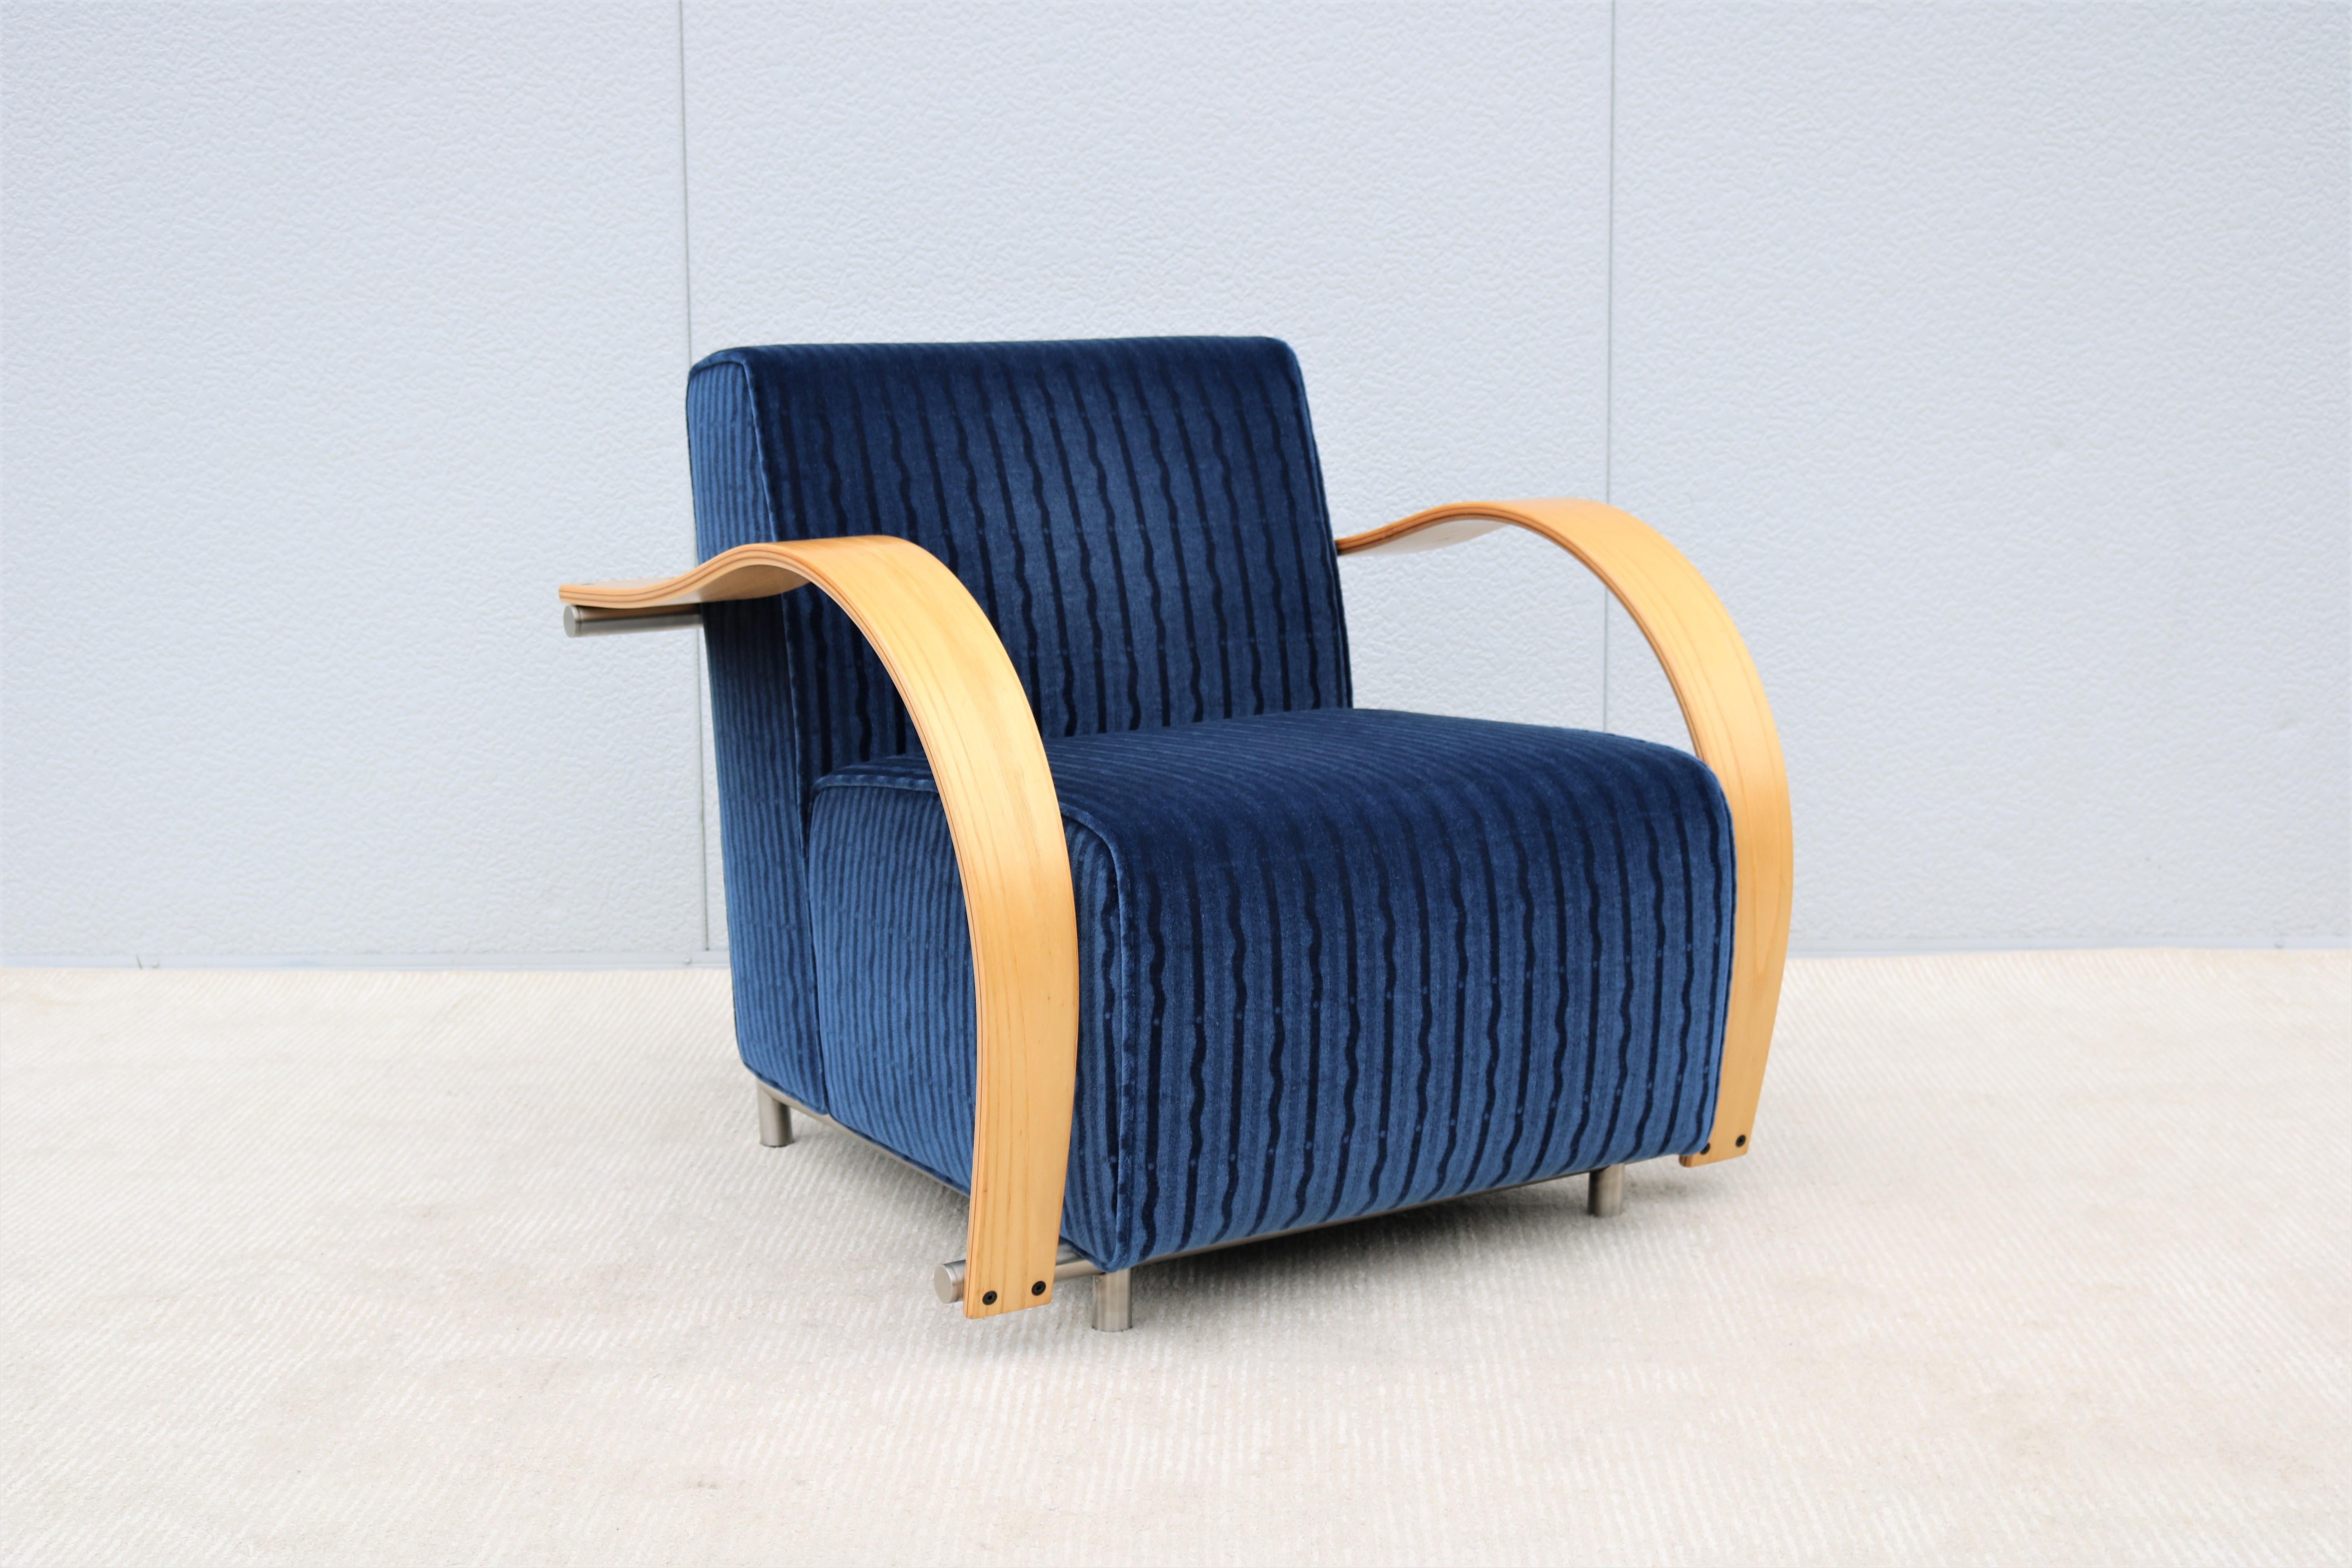 This fabulous modern design Spirit lounge chair gives the impression of Alvar Aalto most popular classic pieces.
Handcrafted with finest quality materials and craftmanship by Nienkamper.
The eye-catching curves design is elegant, inviting and has